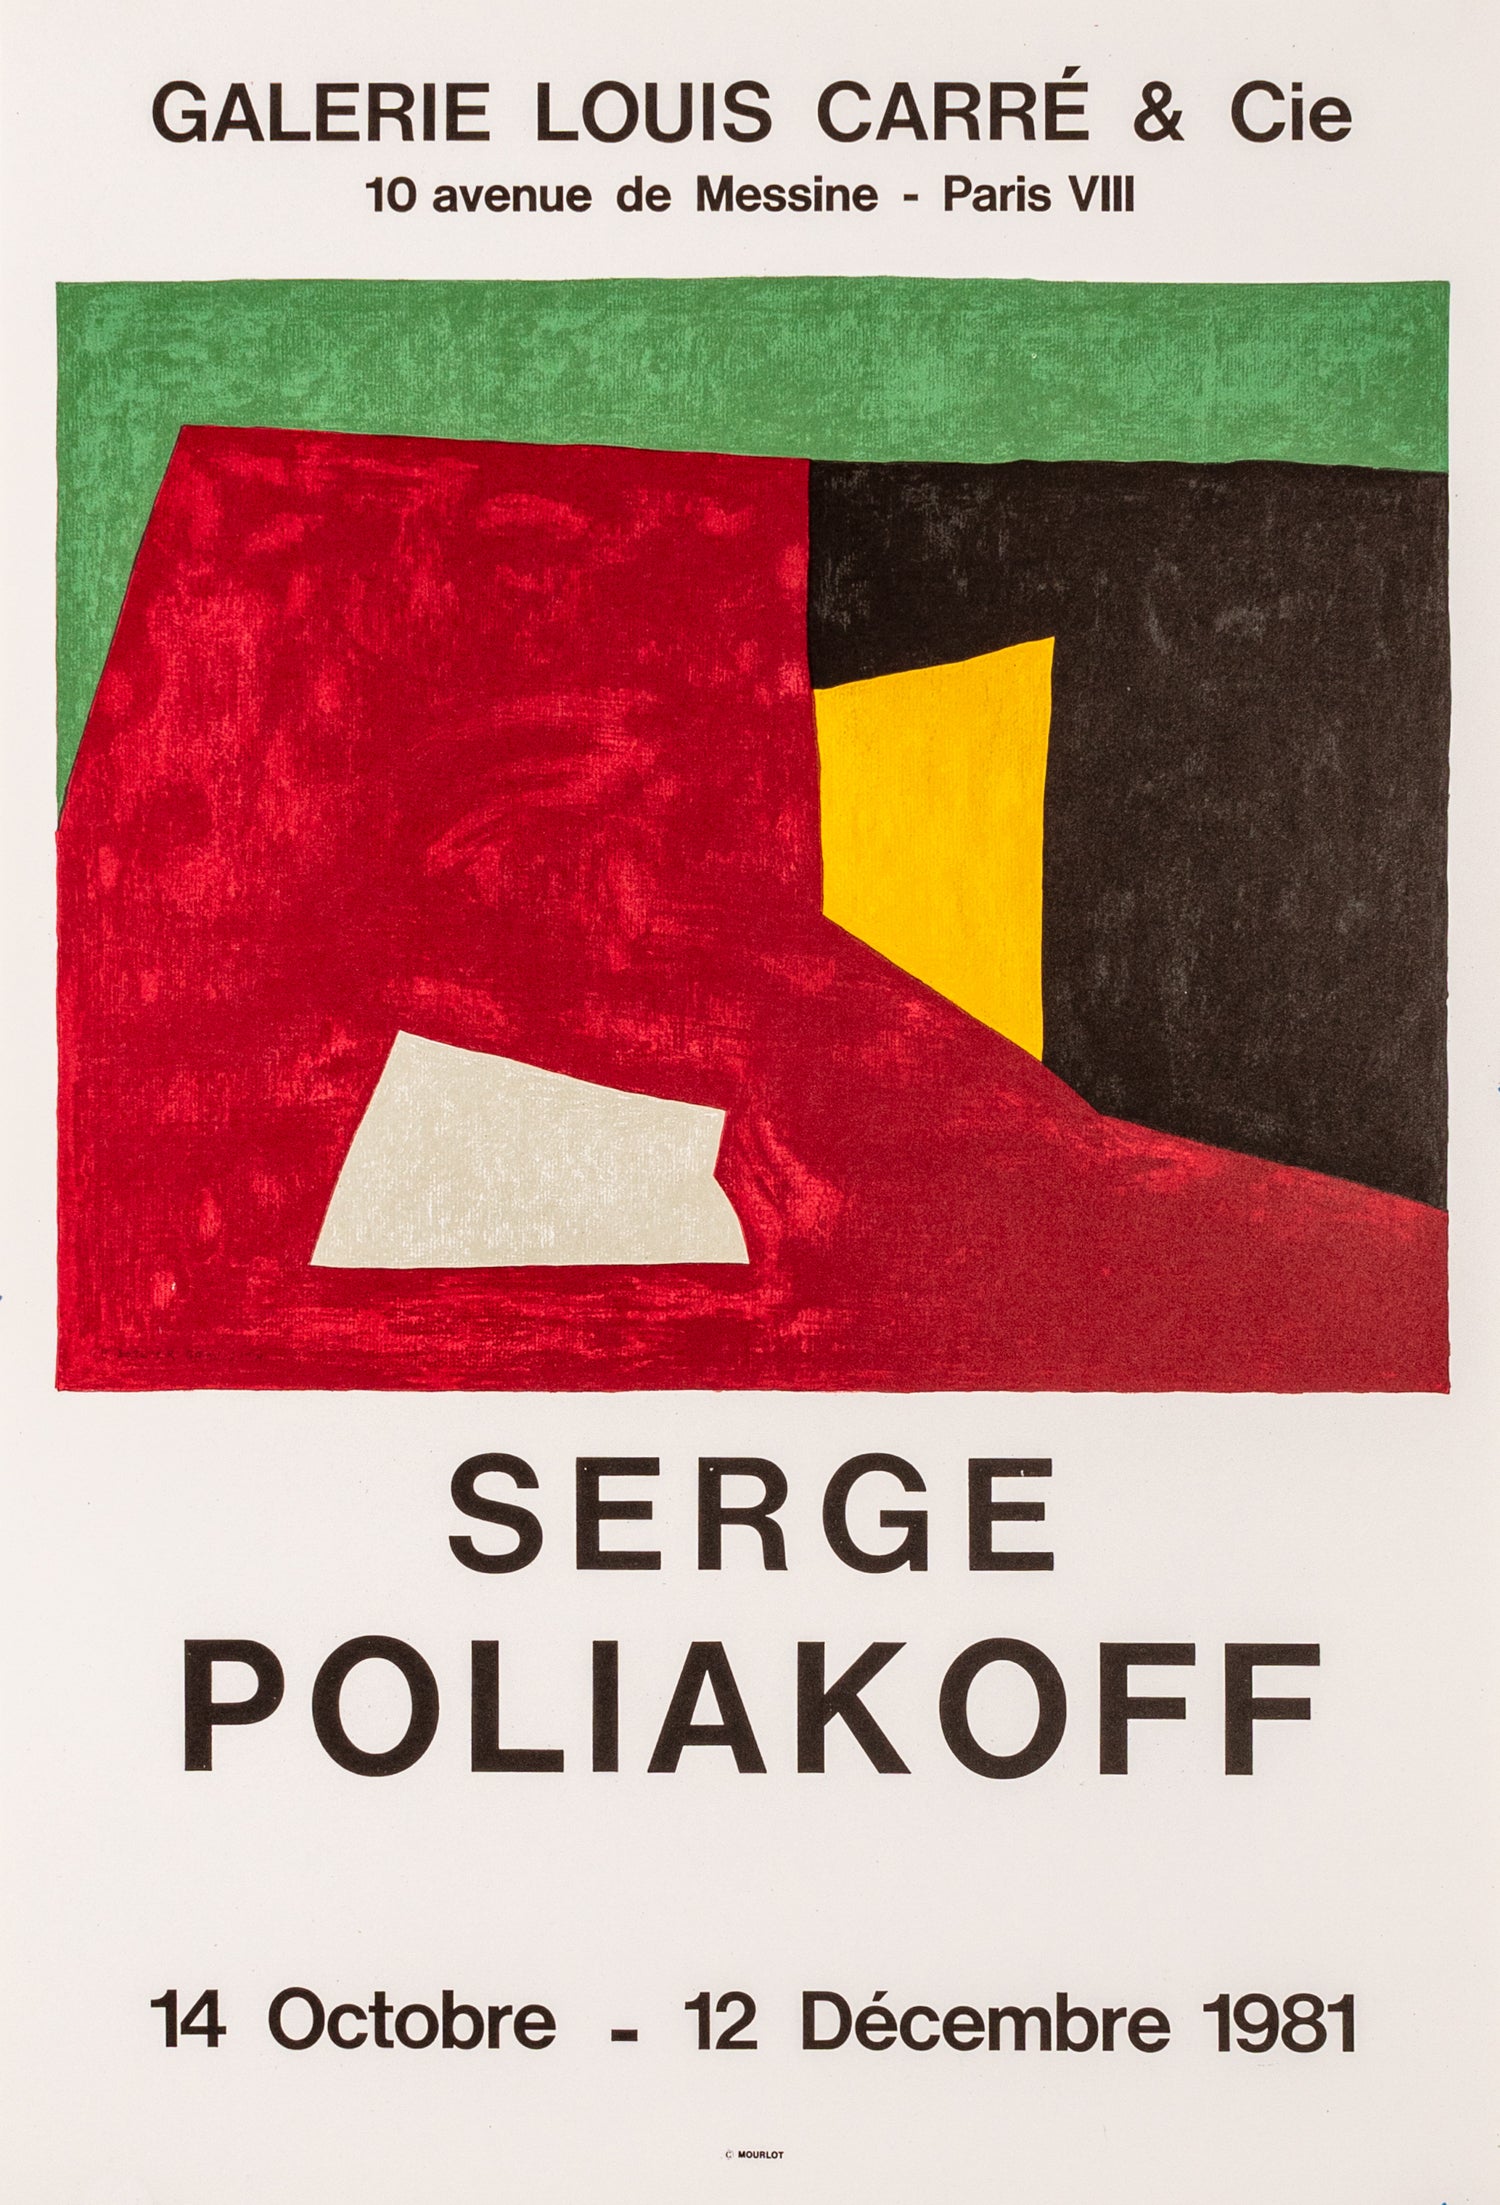 Expo Galerie Louis Carré (after) Serge Poliakoff, 1981 - Mourlot Editions - Fine_Art - Poster - Lithograph - Wall Art - Vintage - Prints - Original